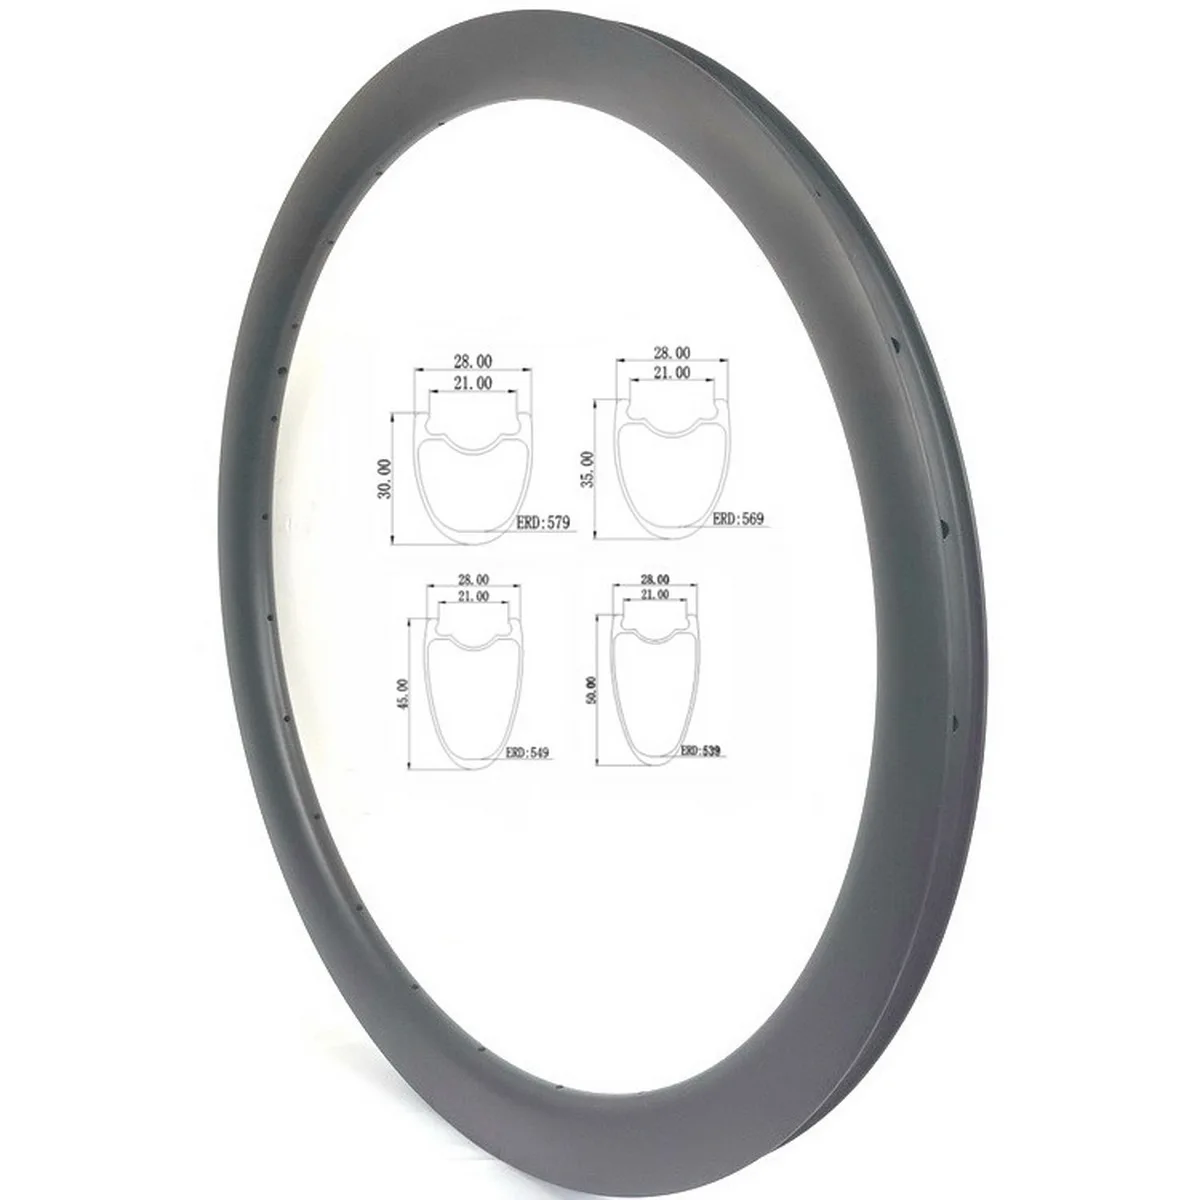 

700c High Power Carbon Road Bike Rims 28mm Width Tubeless Disc Brake 30mm 35mm 40mm 45mm 50mm 55mm Profile Bicycle Parts